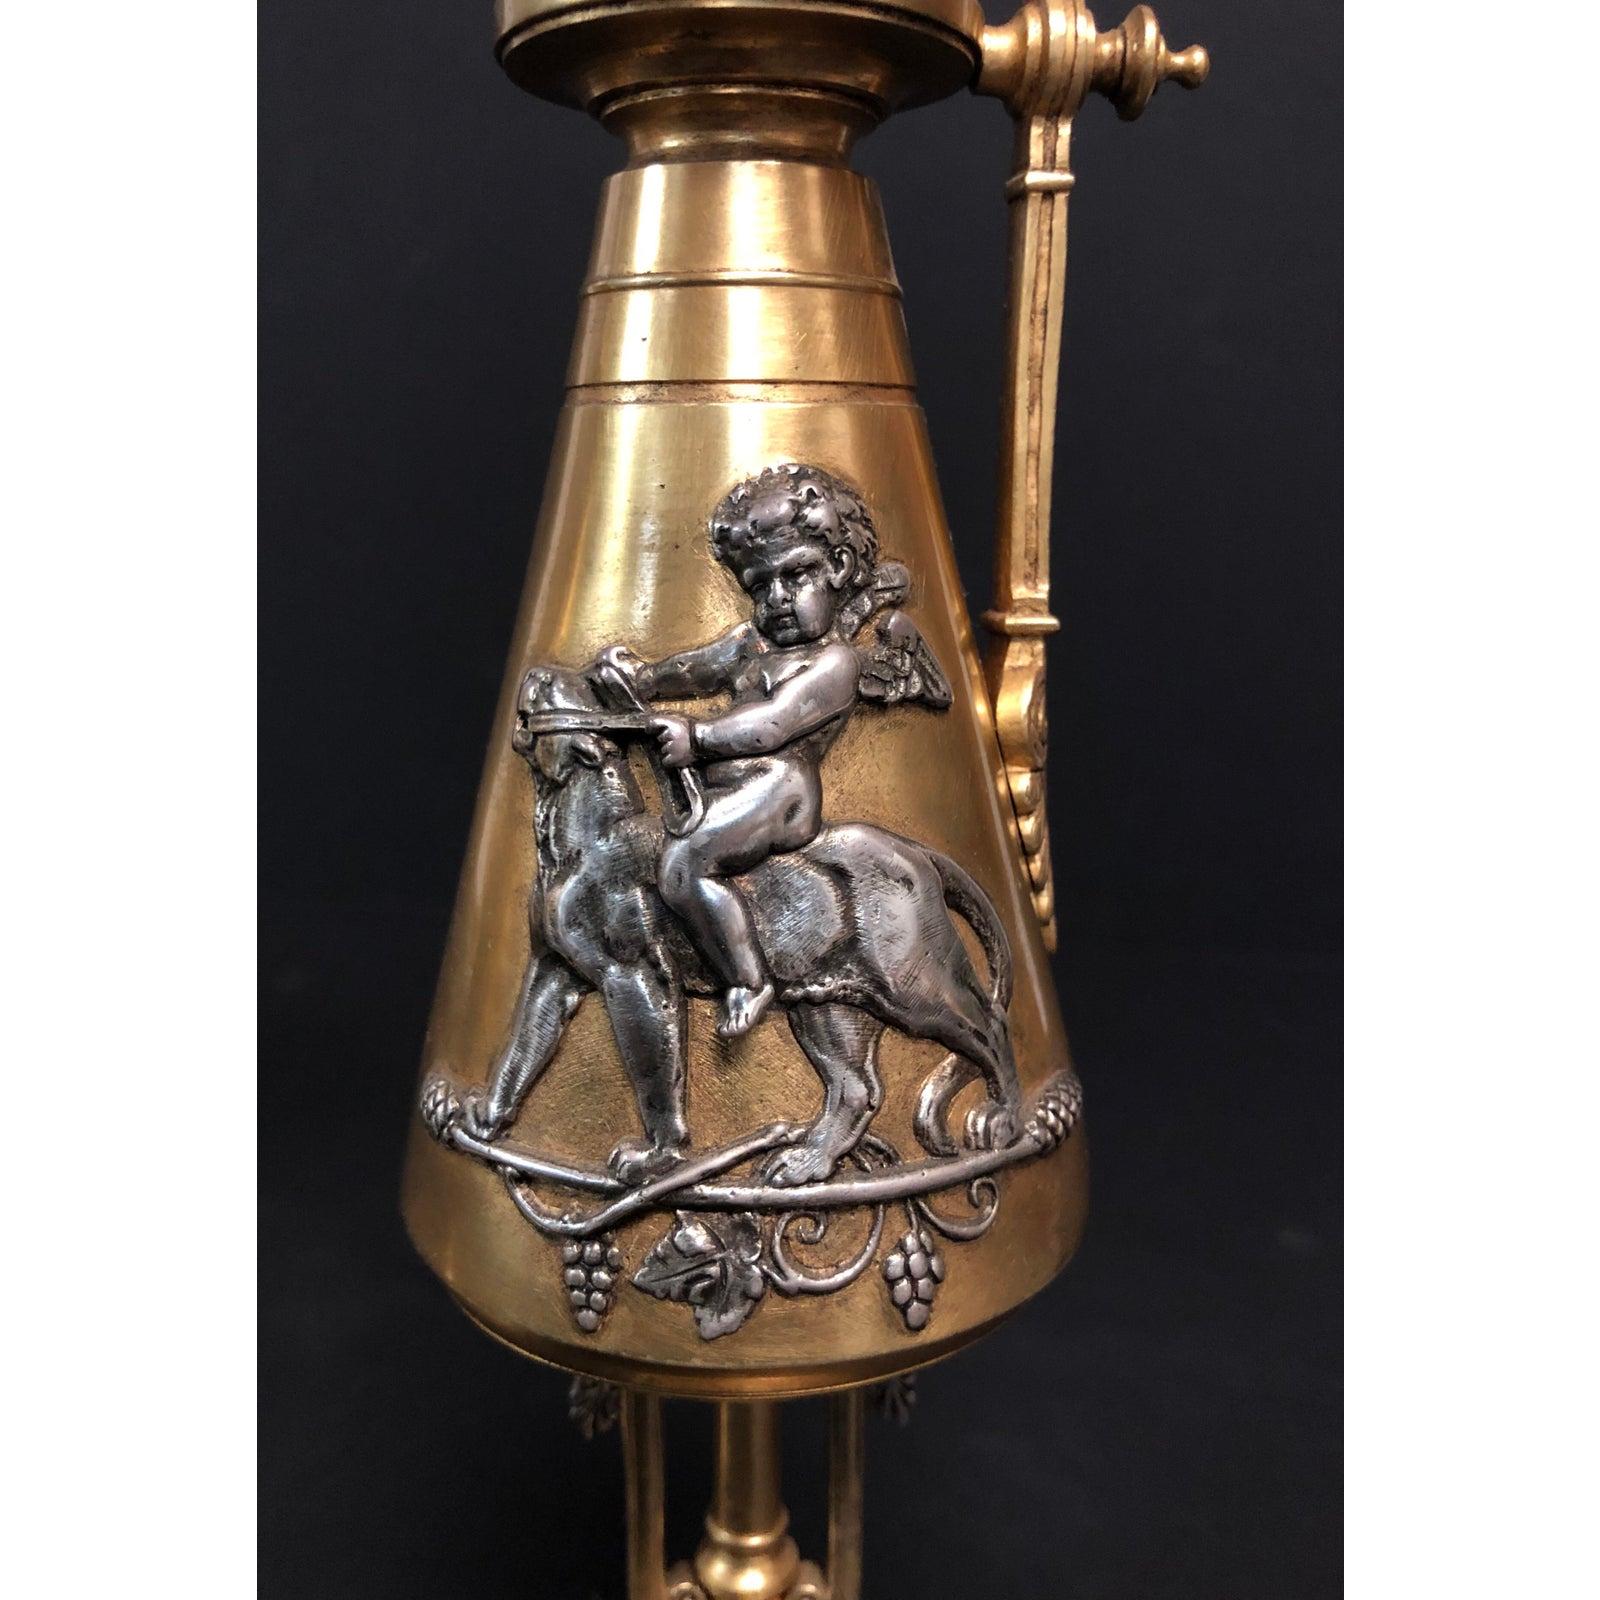 A fine pair of 19th century figural urns doré and silver over bronze. Pair gilt and silver over bronze figural ewers. Fine quality casting. Cupid’s riding panthers in the manor of Albert-Ernest Carrier-Belleuse. French (1824-1887).